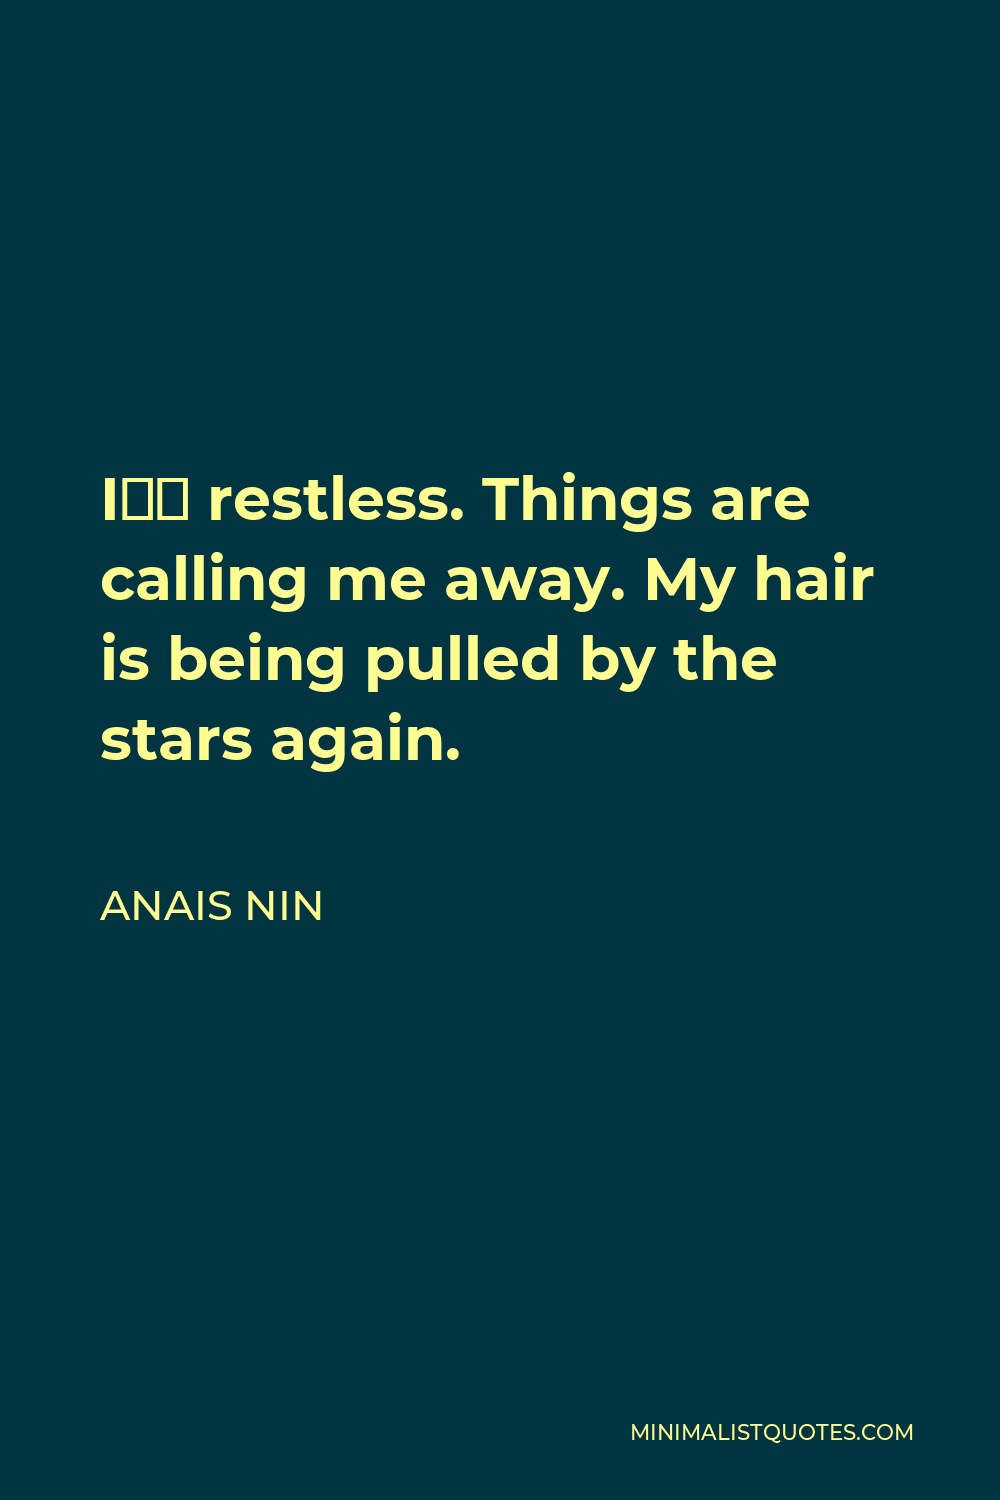 Anais Nin Quote - I’m restless. Things are calling me away. My hair is being pulled by the stars again.